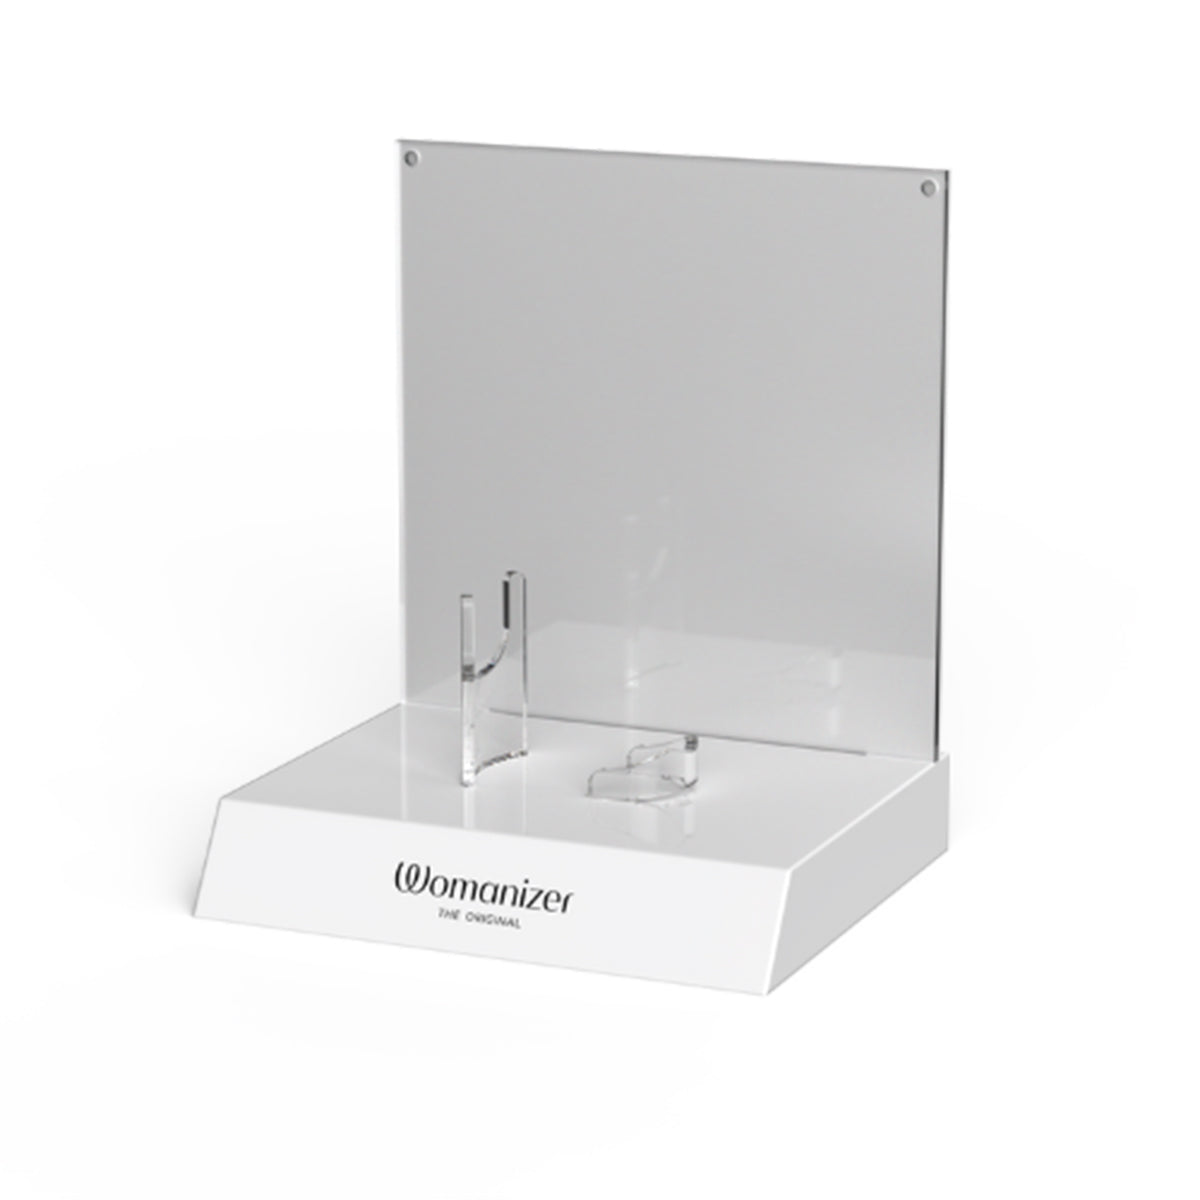 Womanizer Universal Display Stand with backwall